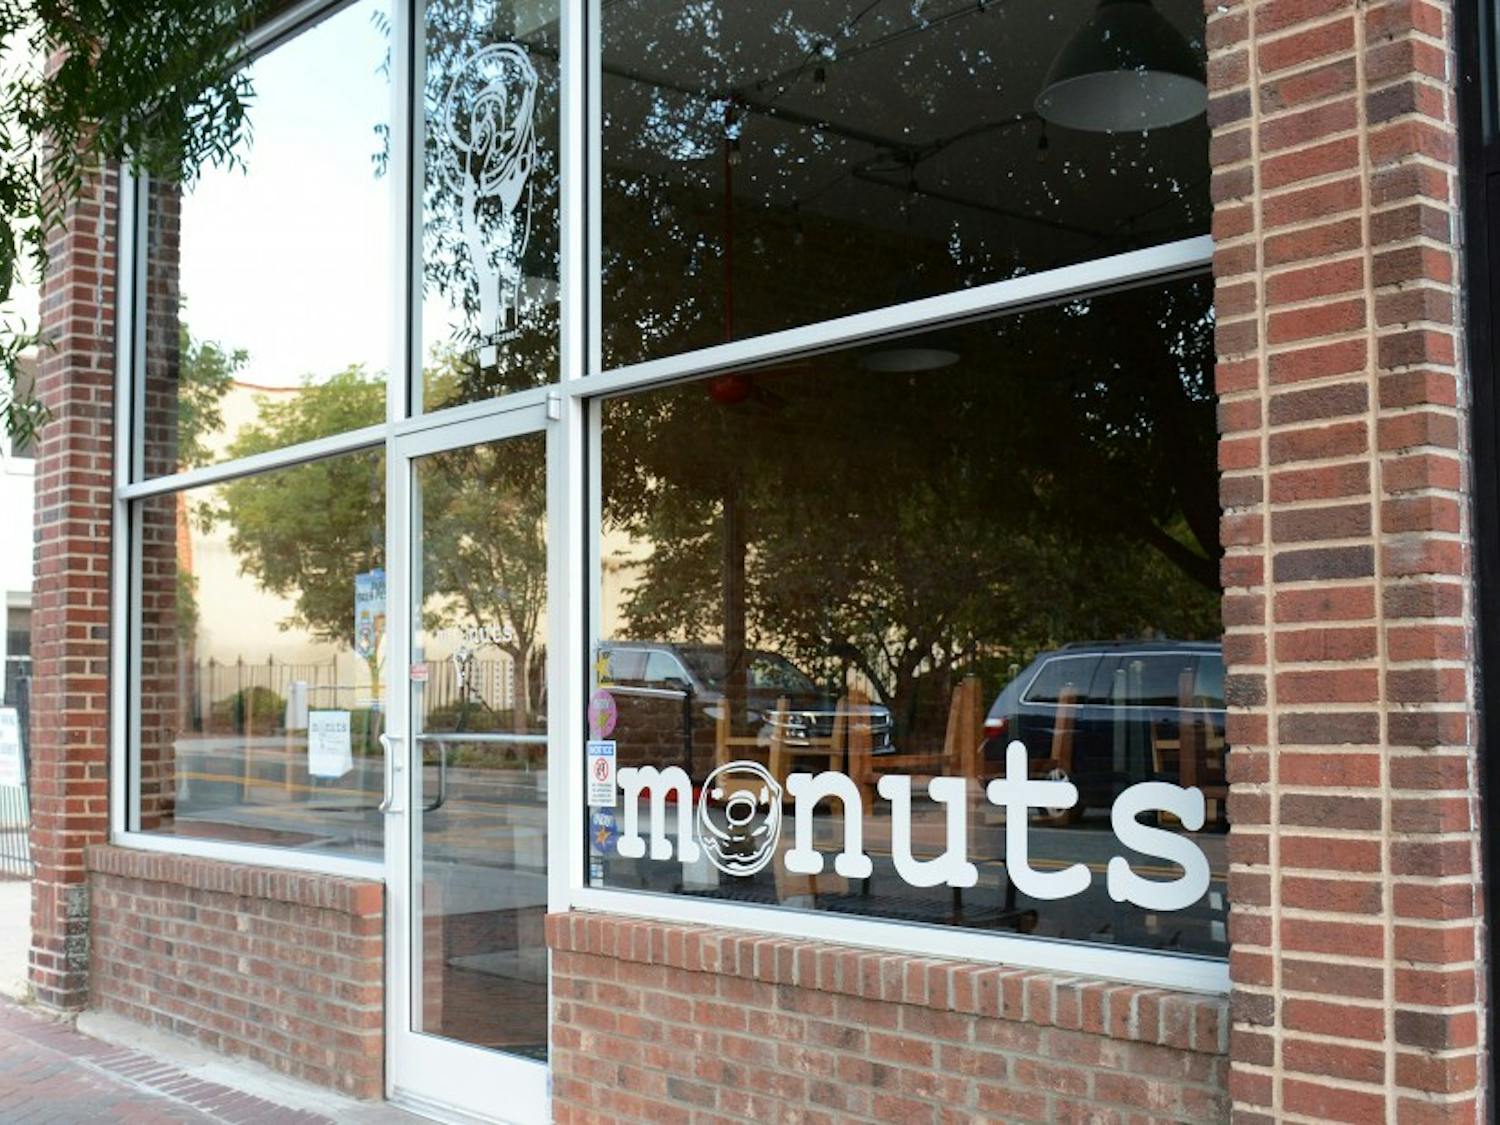 Monuts began as a shop on the back of a tricycle and is now the small storefront on East Parrish Street pictured above, but space limitations and high demand are causing the cafe to move.